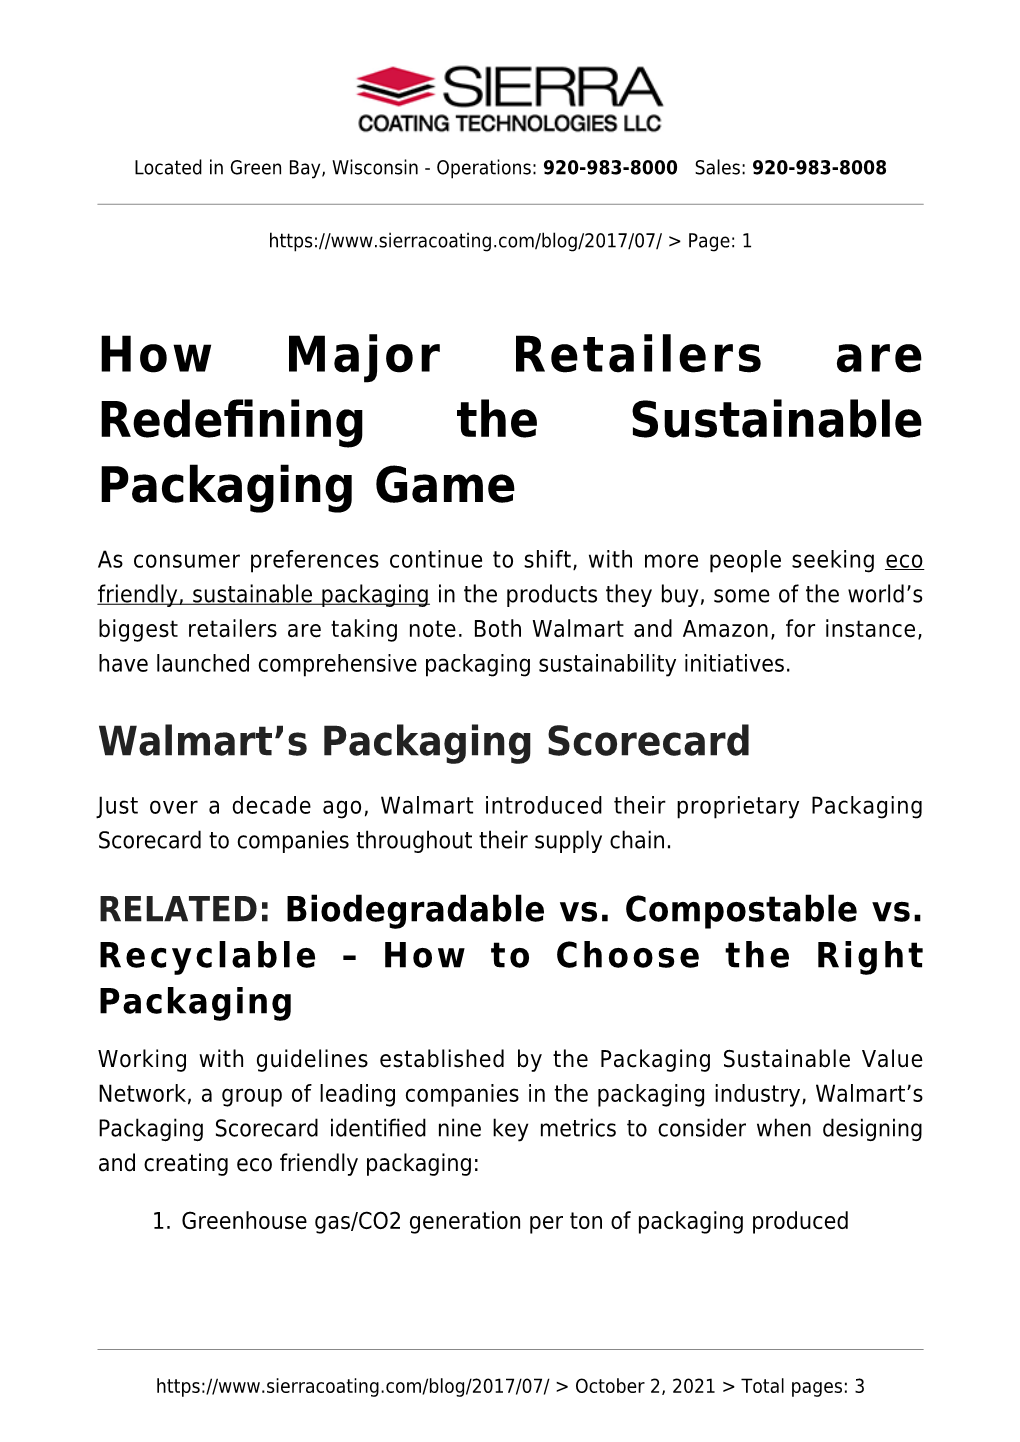 How Major Retailers Are Redefining the Sustainable Packaging Game